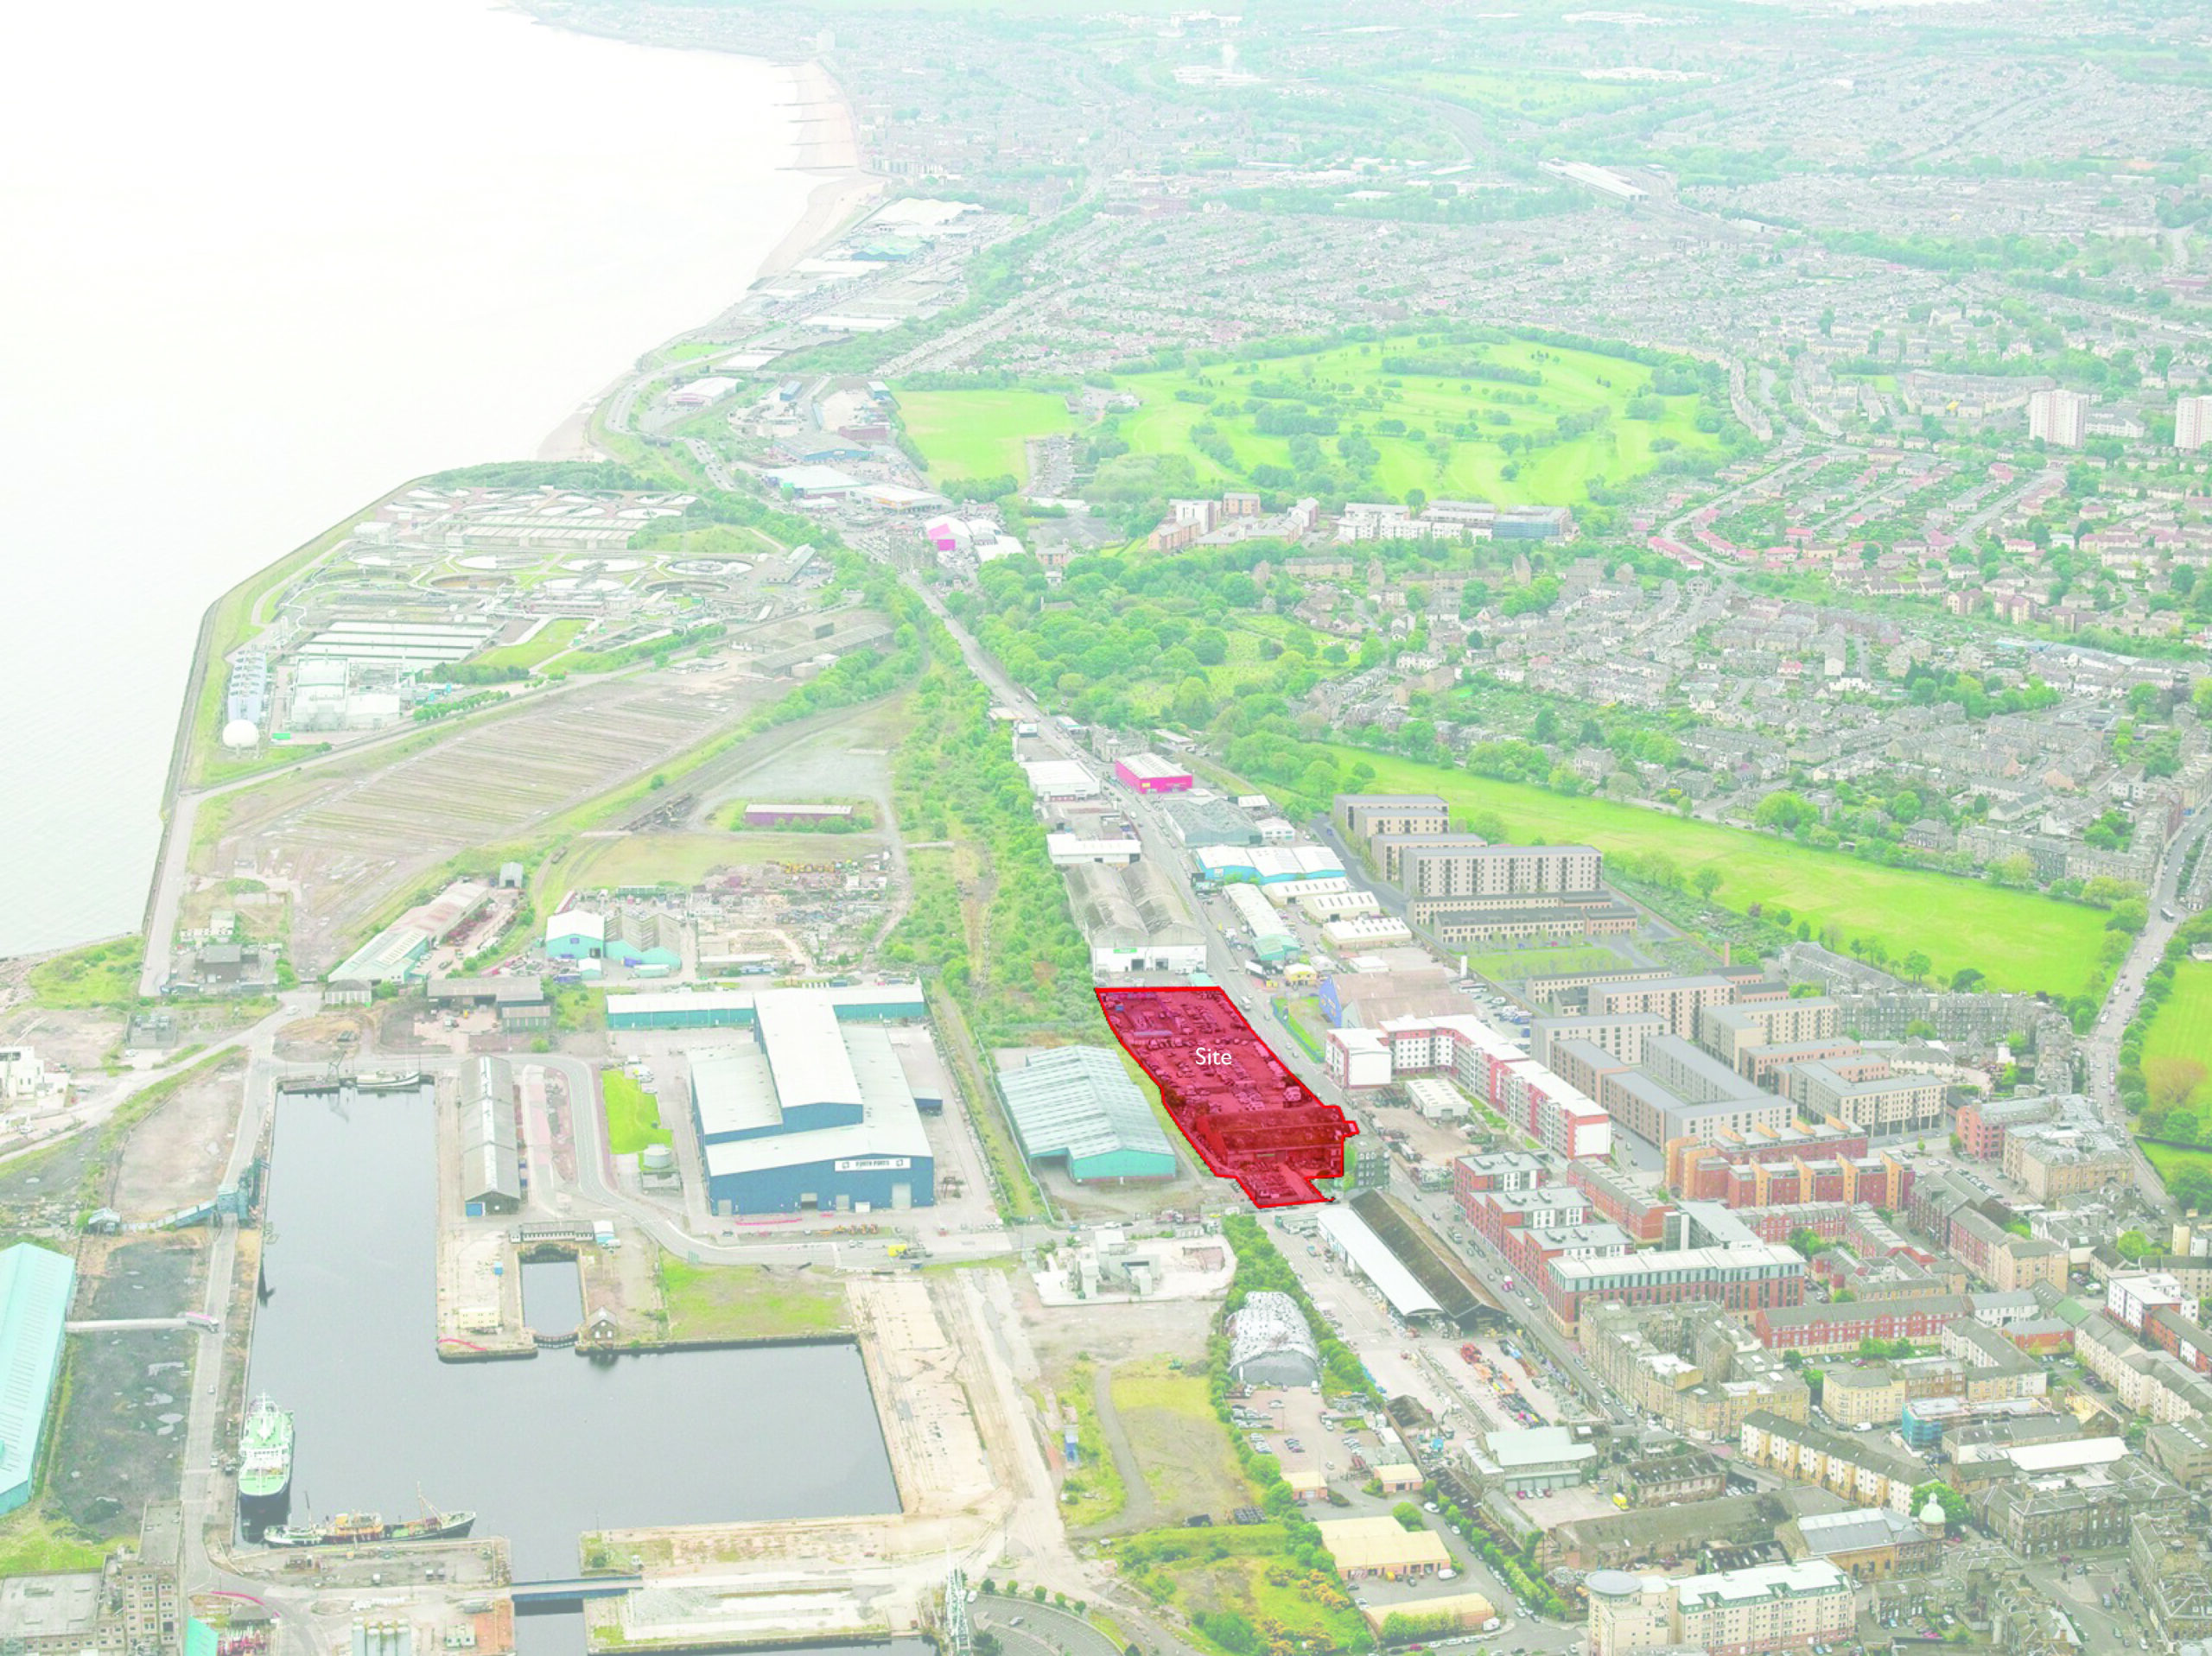 285-home apartment plan submitted for Leith industrial site